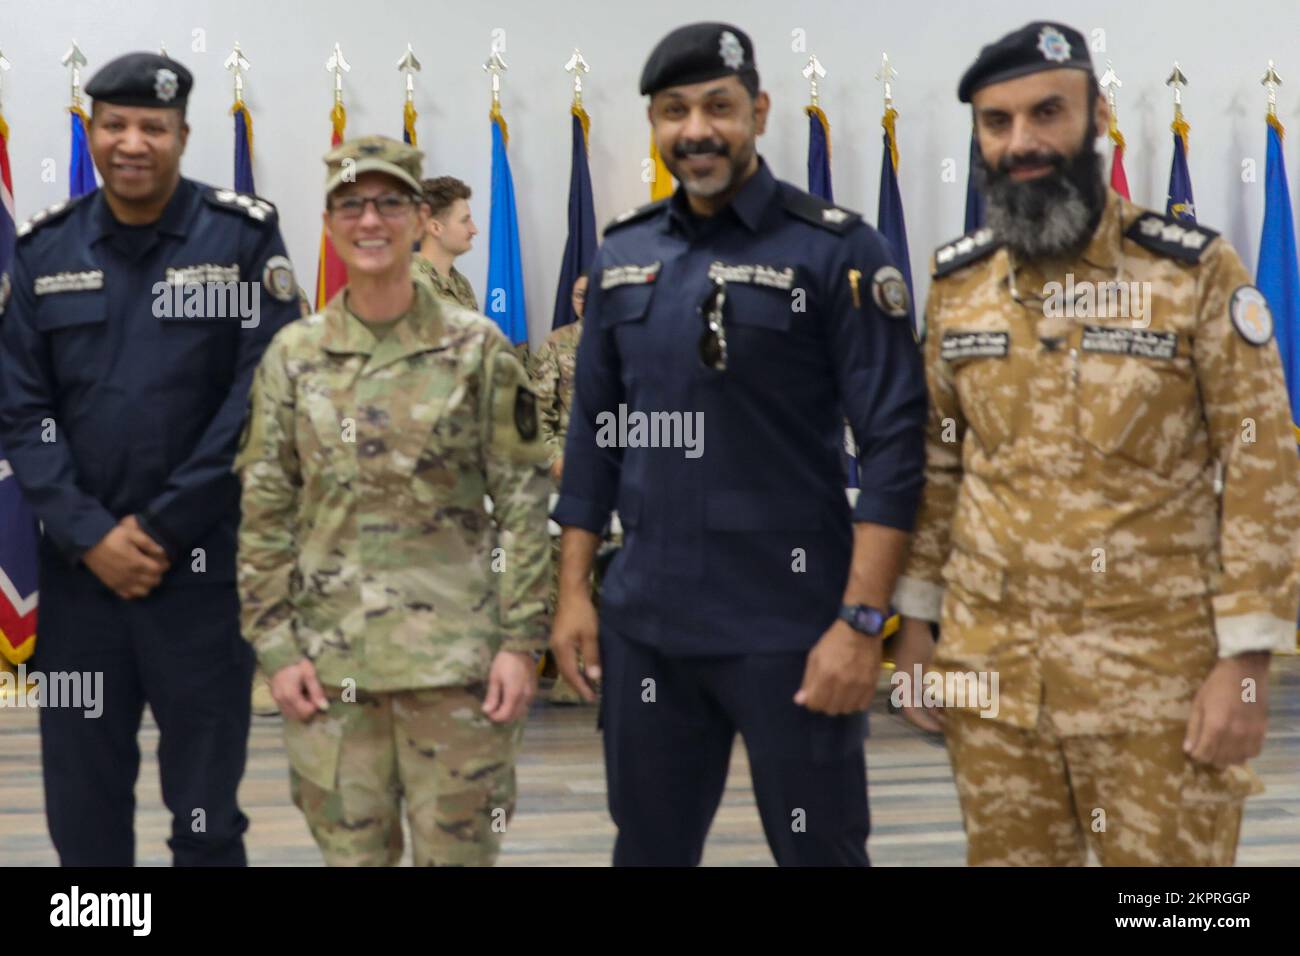 U.S. Army Col. Carrie Perez, the commanding officer of the 36th Sustainment Brigade, and Command Sgt. Maj. Ernest Castillo, the Brigade command sergeant major for the 36th SB, stand beside Kuwait leaders after a Transfer of Authority ceremony at the MWR theater on Camp Arifjan, Kuwait, Nov. 3, 2022. The 36th SB fostered a respectful working relationship with Kuwait leaders during their service in Kuwait. Stock Photo